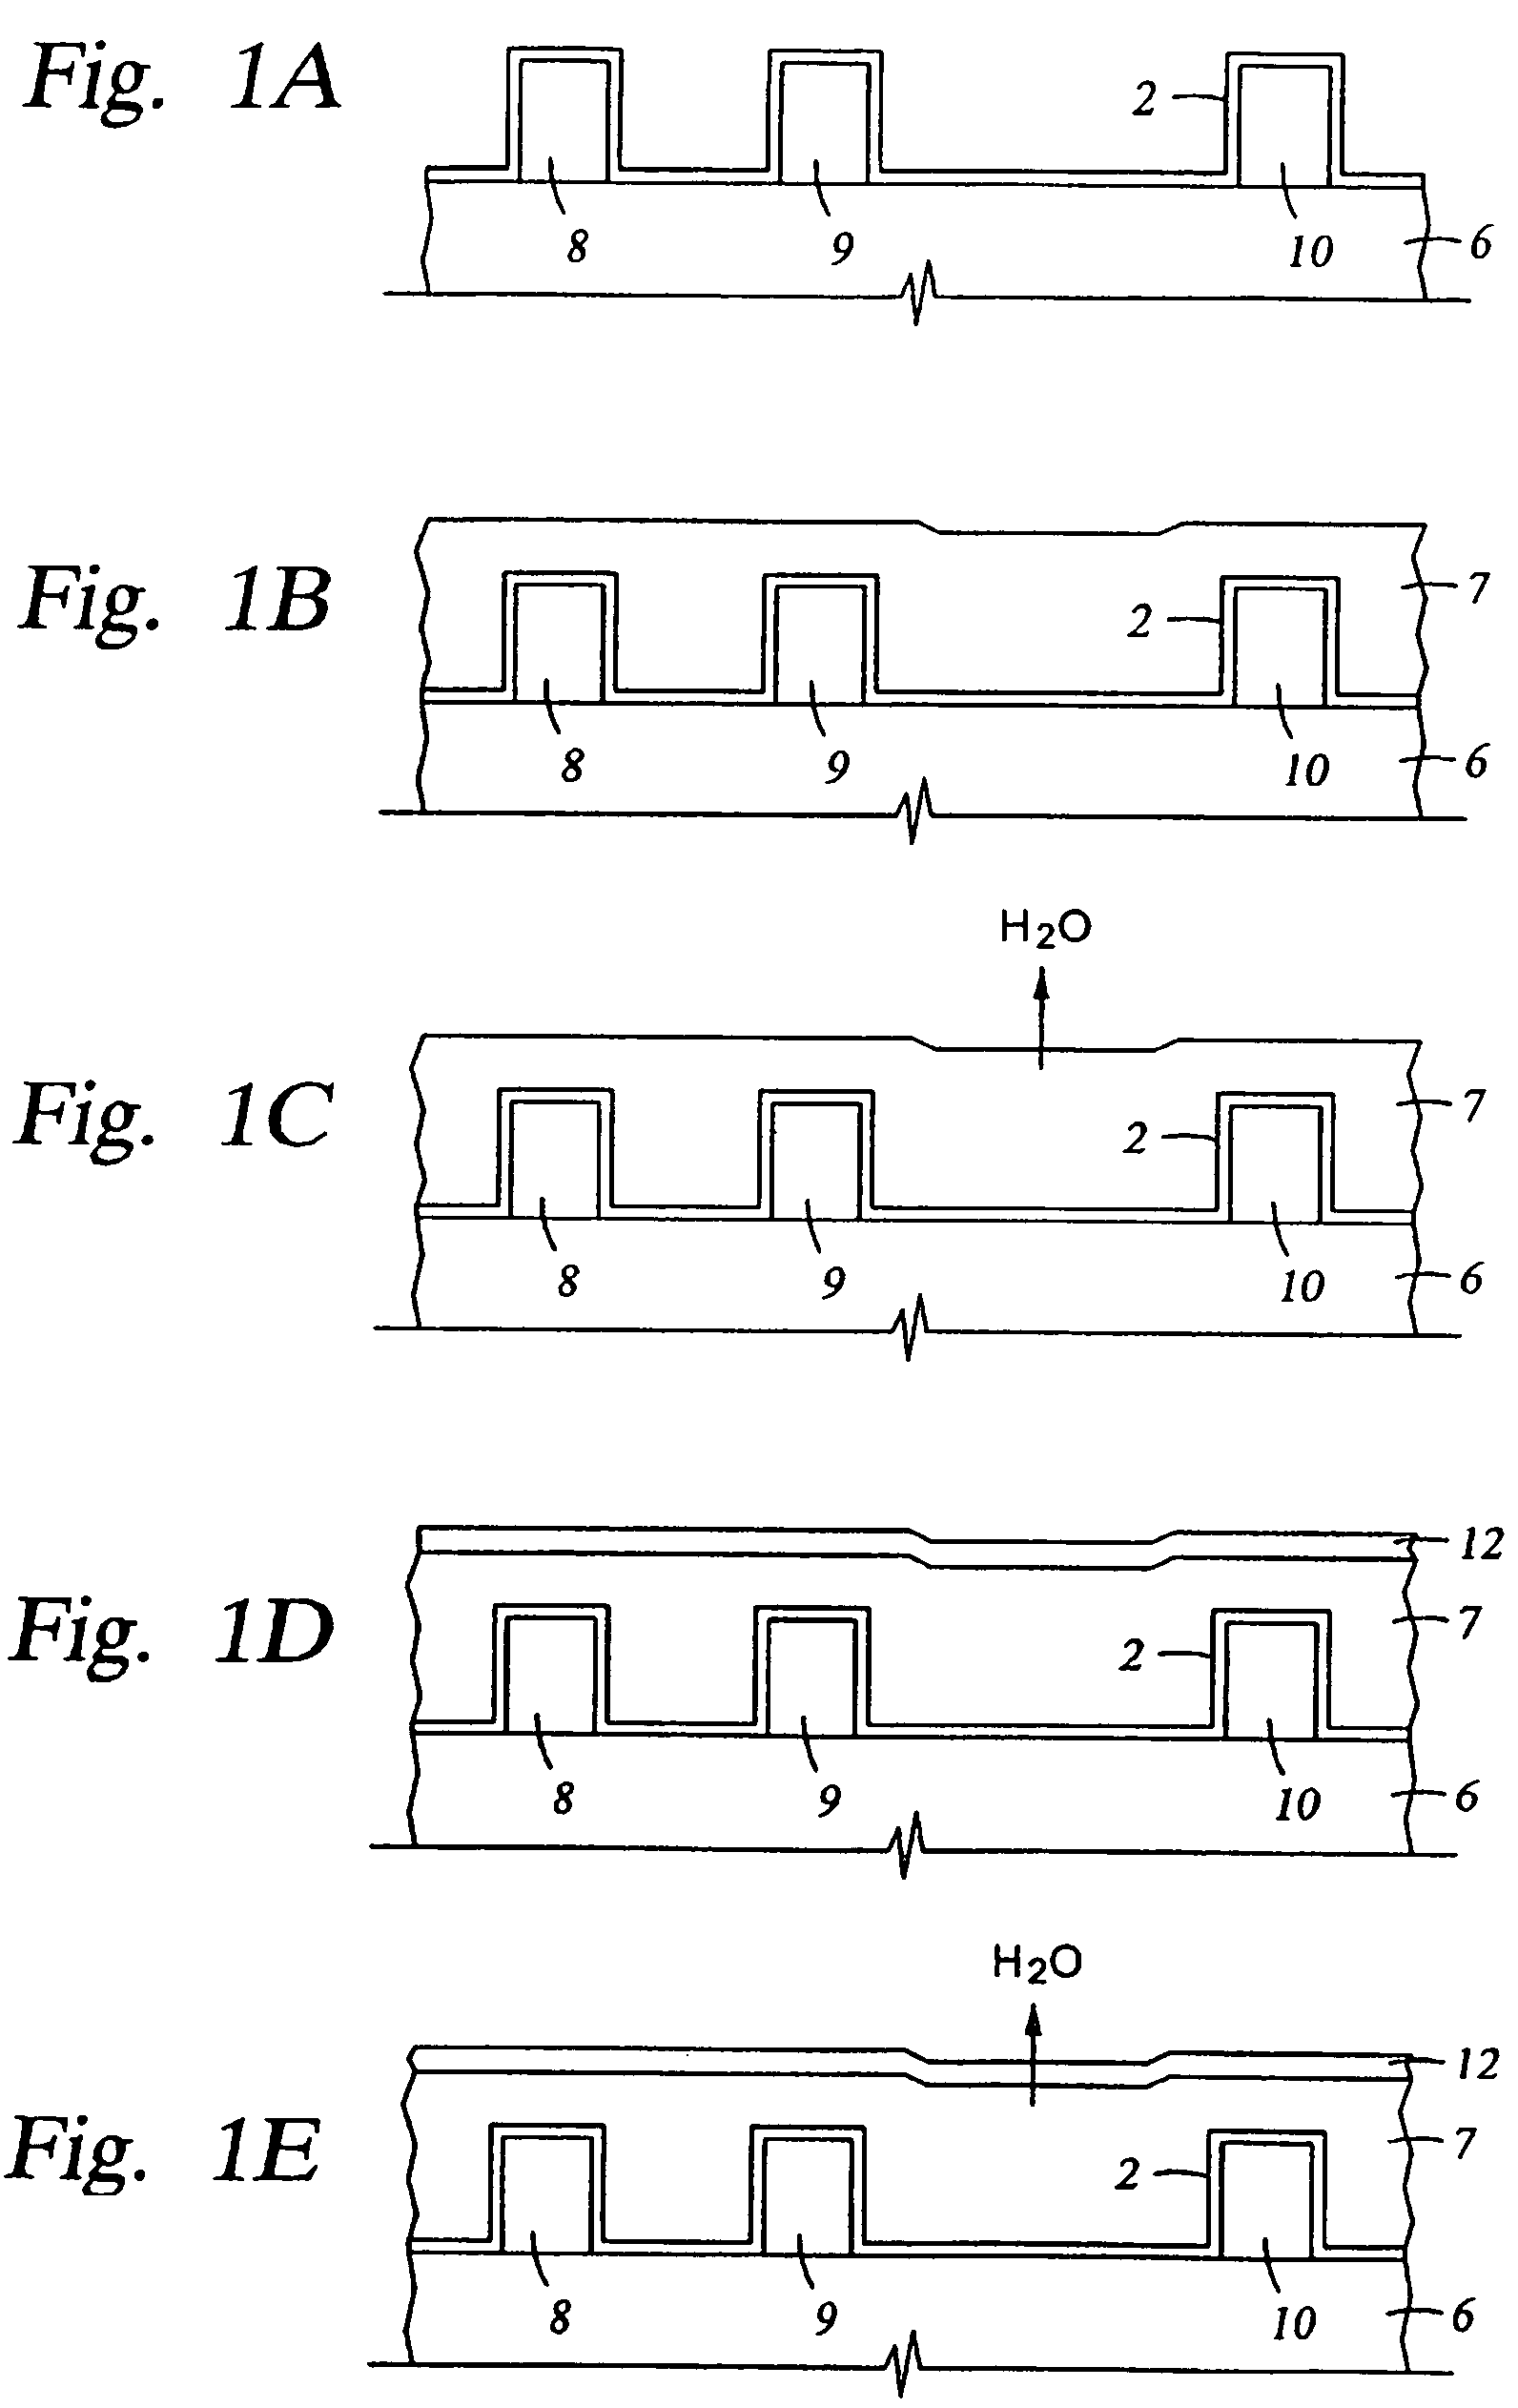 Techniques promoting adhesion of porous low K film to underlying barrier layer